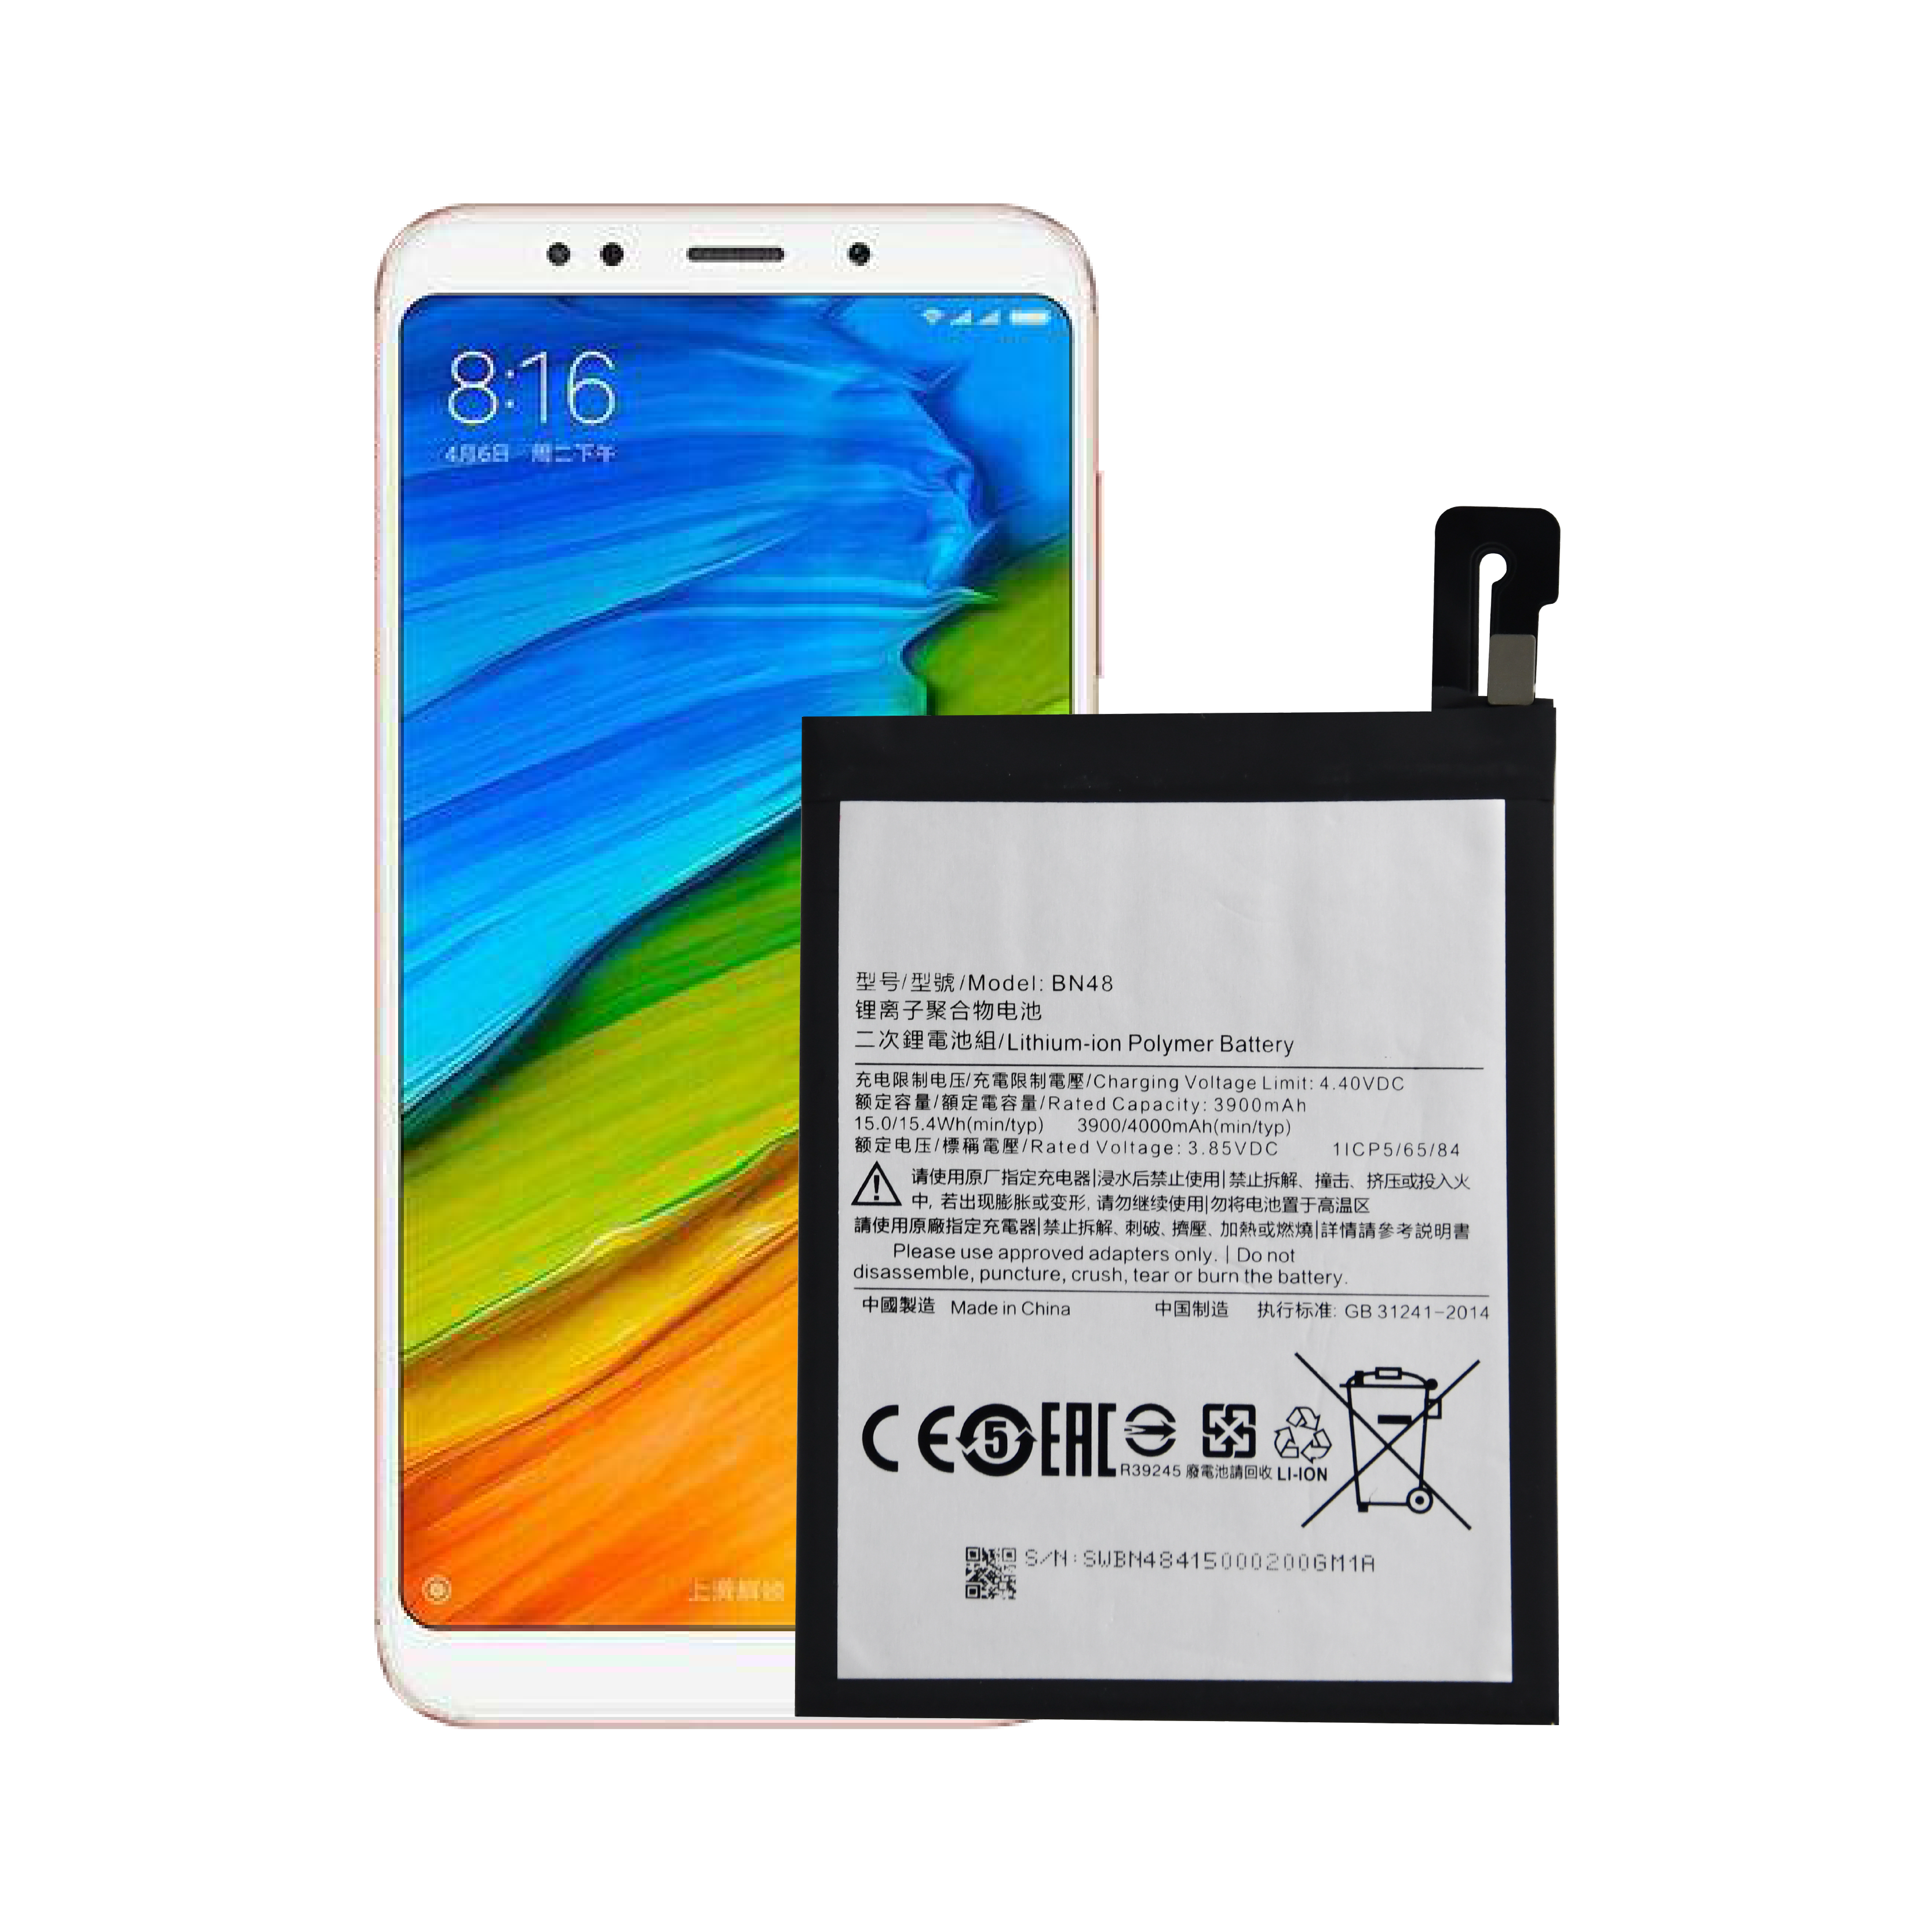 5Plus Battery Supplier: Everything You Need to Know about the Hongmi 5Plus Battery Supplier